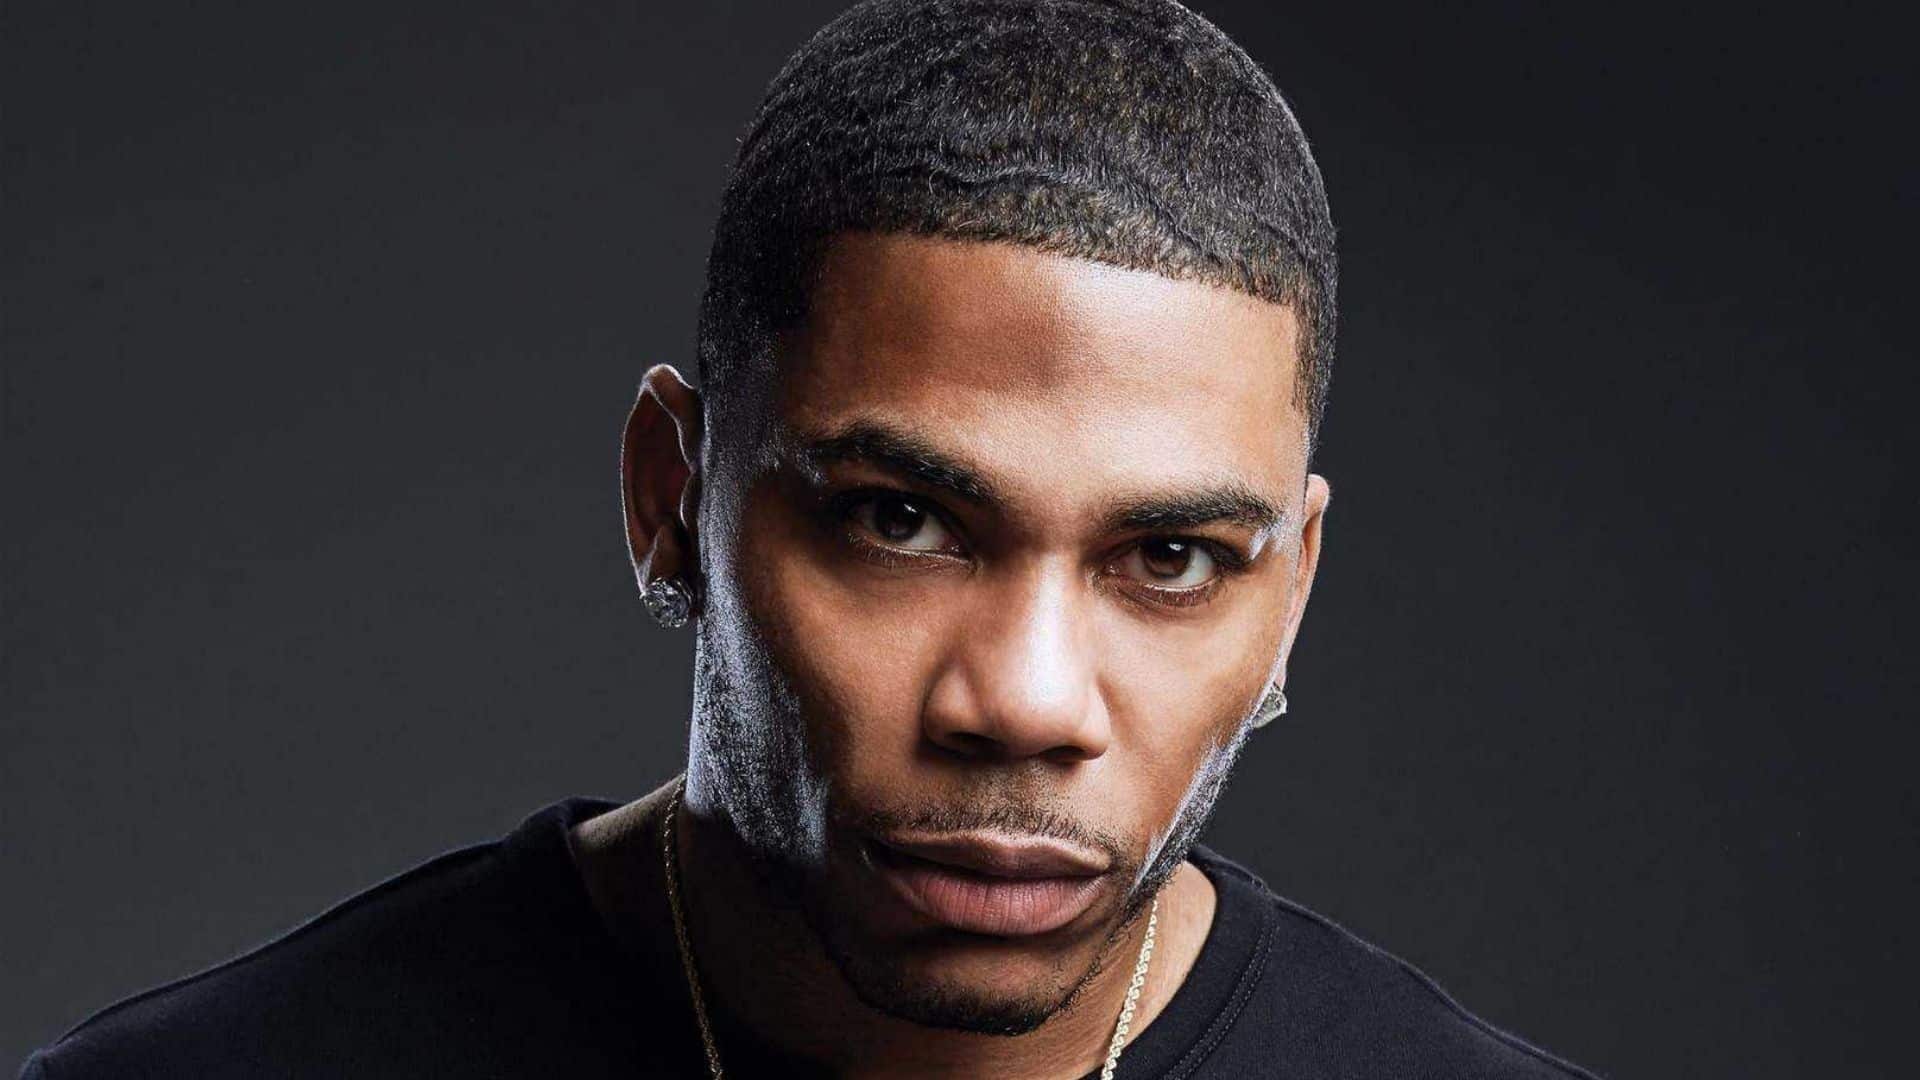 Nelly Net Worth 2022: How Is The Net Worth Of Nelly $40 Million?